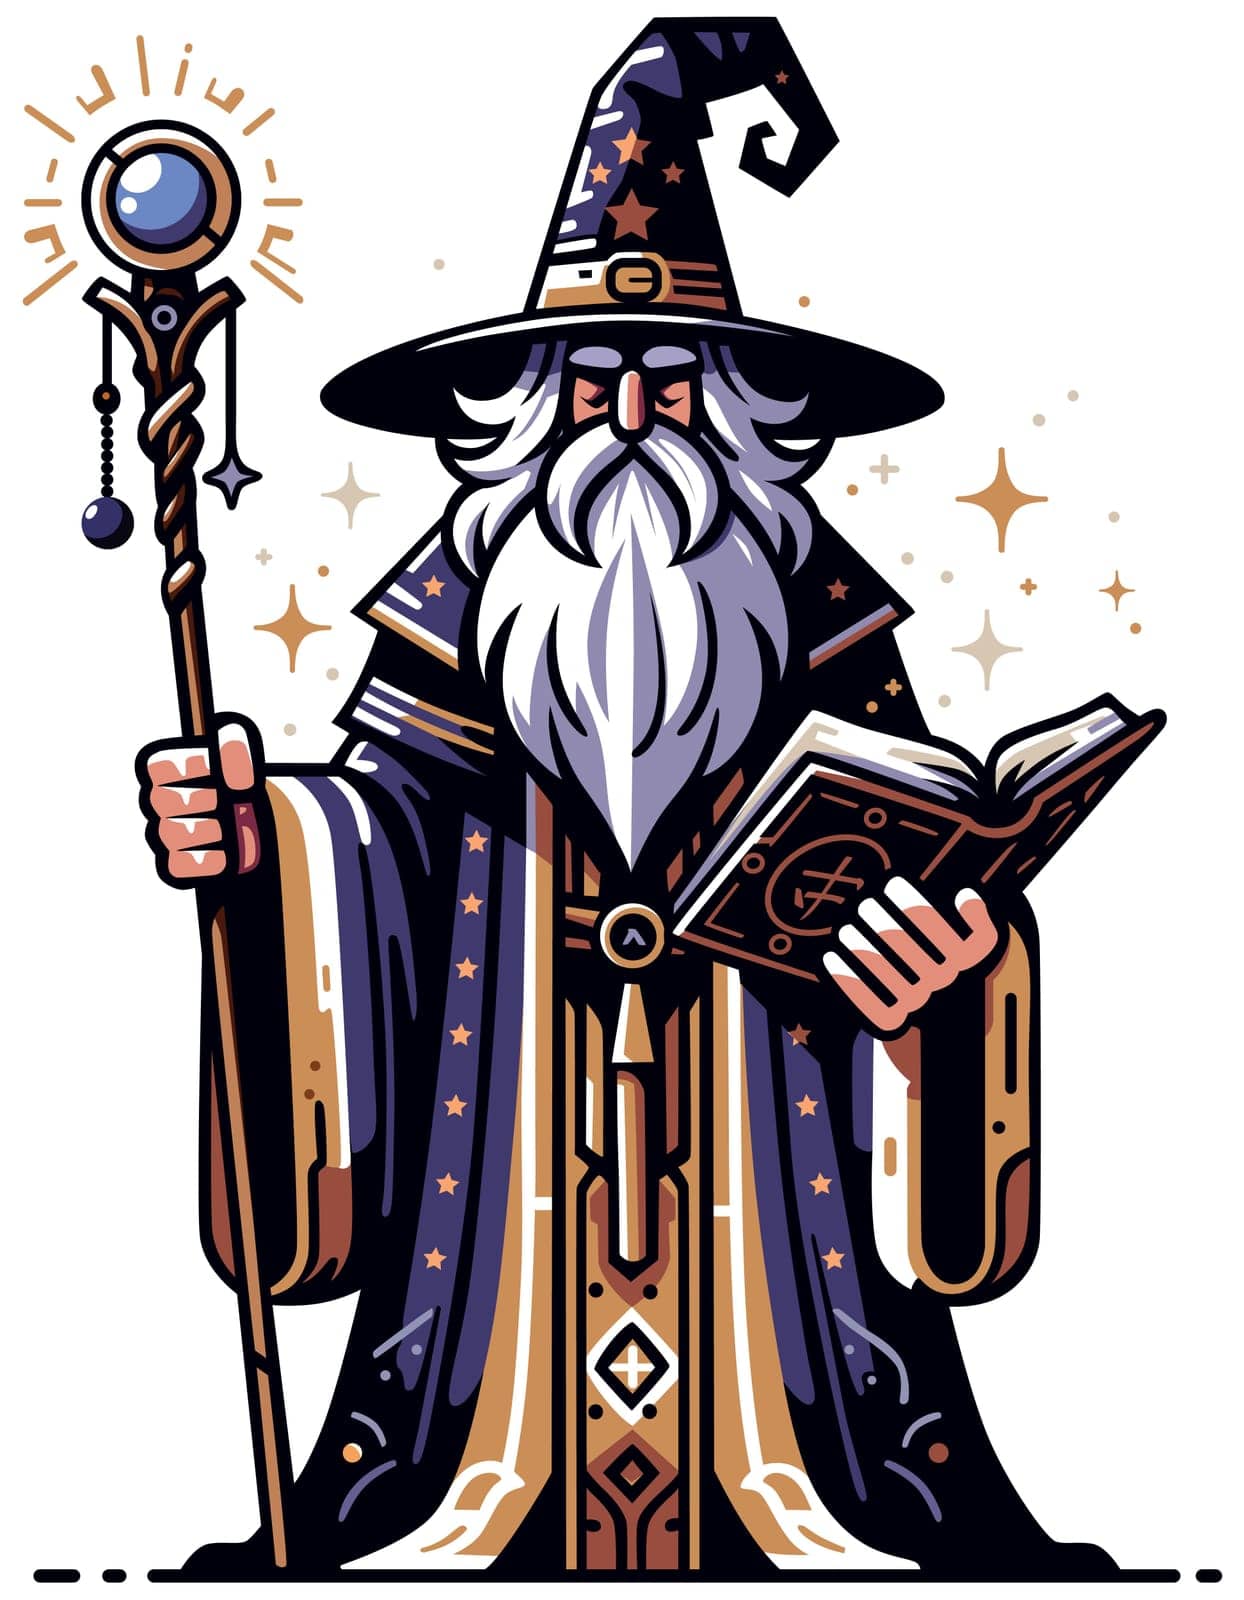 Wizard with staff and spellbook casts magic, adorned in a starry robe.